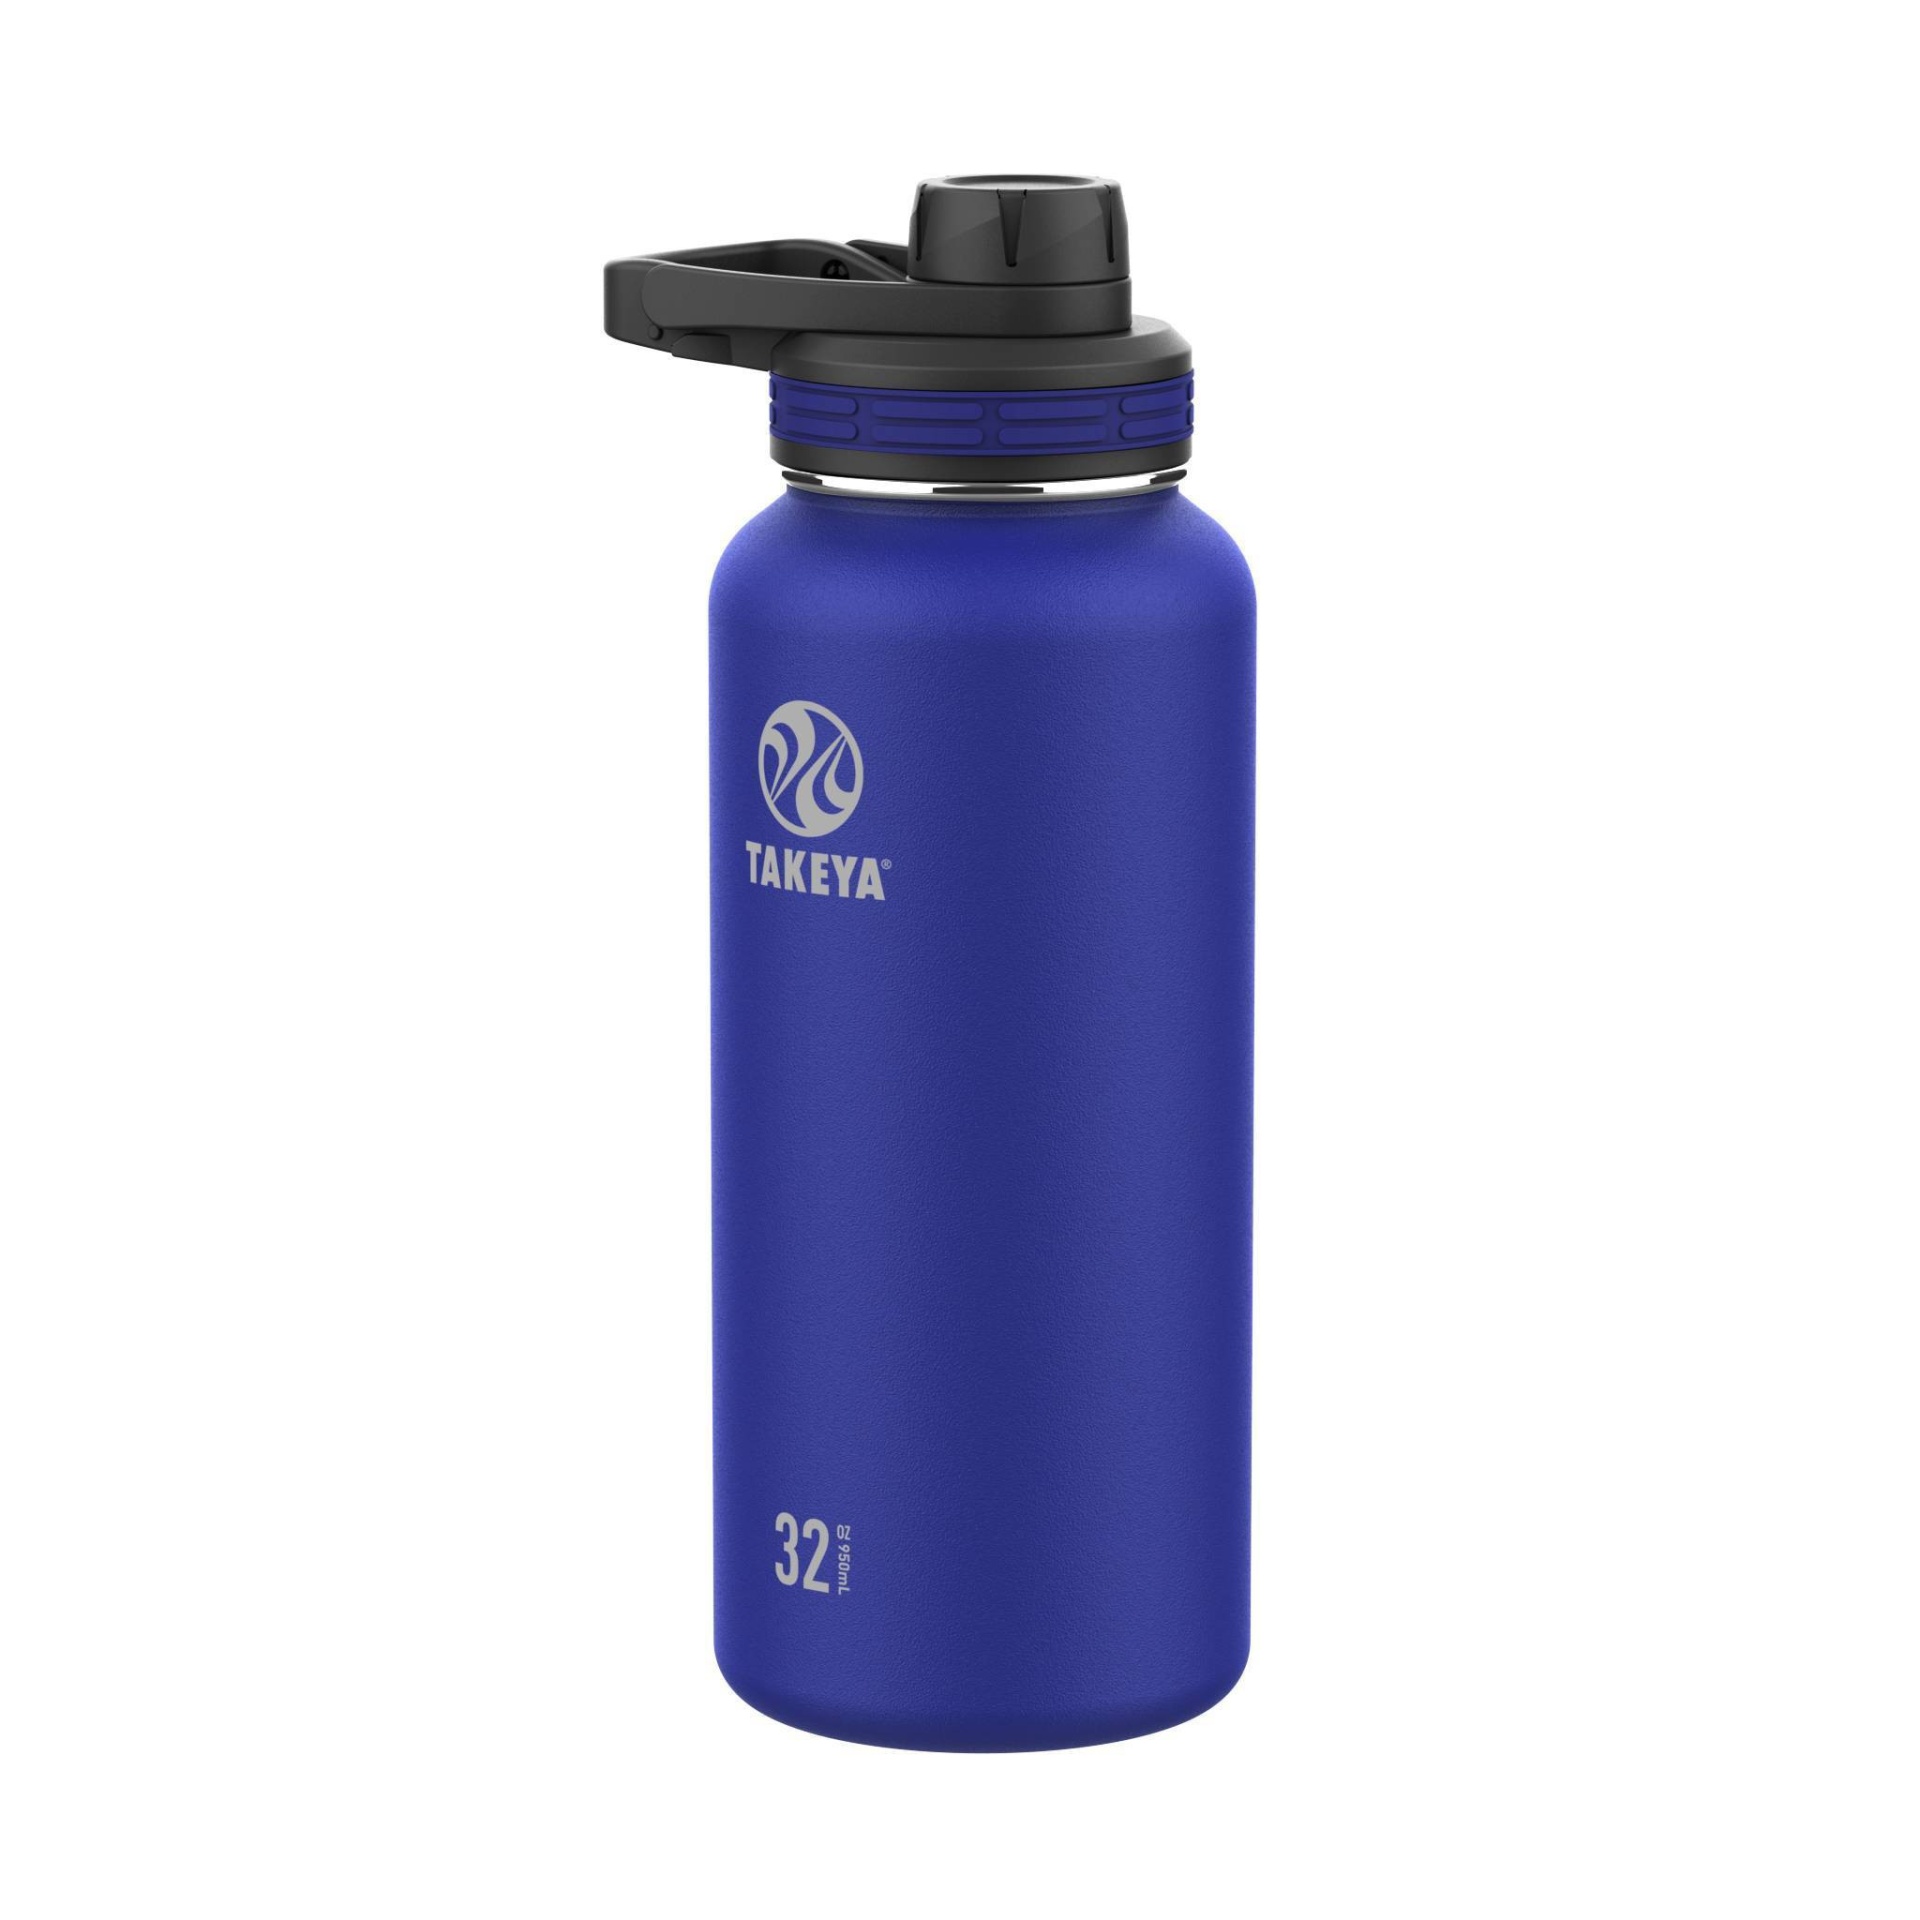 slide 1 of 3, Takeya 32oz Outdoor Essential Insulated Stainless Steel Water Bottle with Spout Cap - Neptune Blue, 1 ct